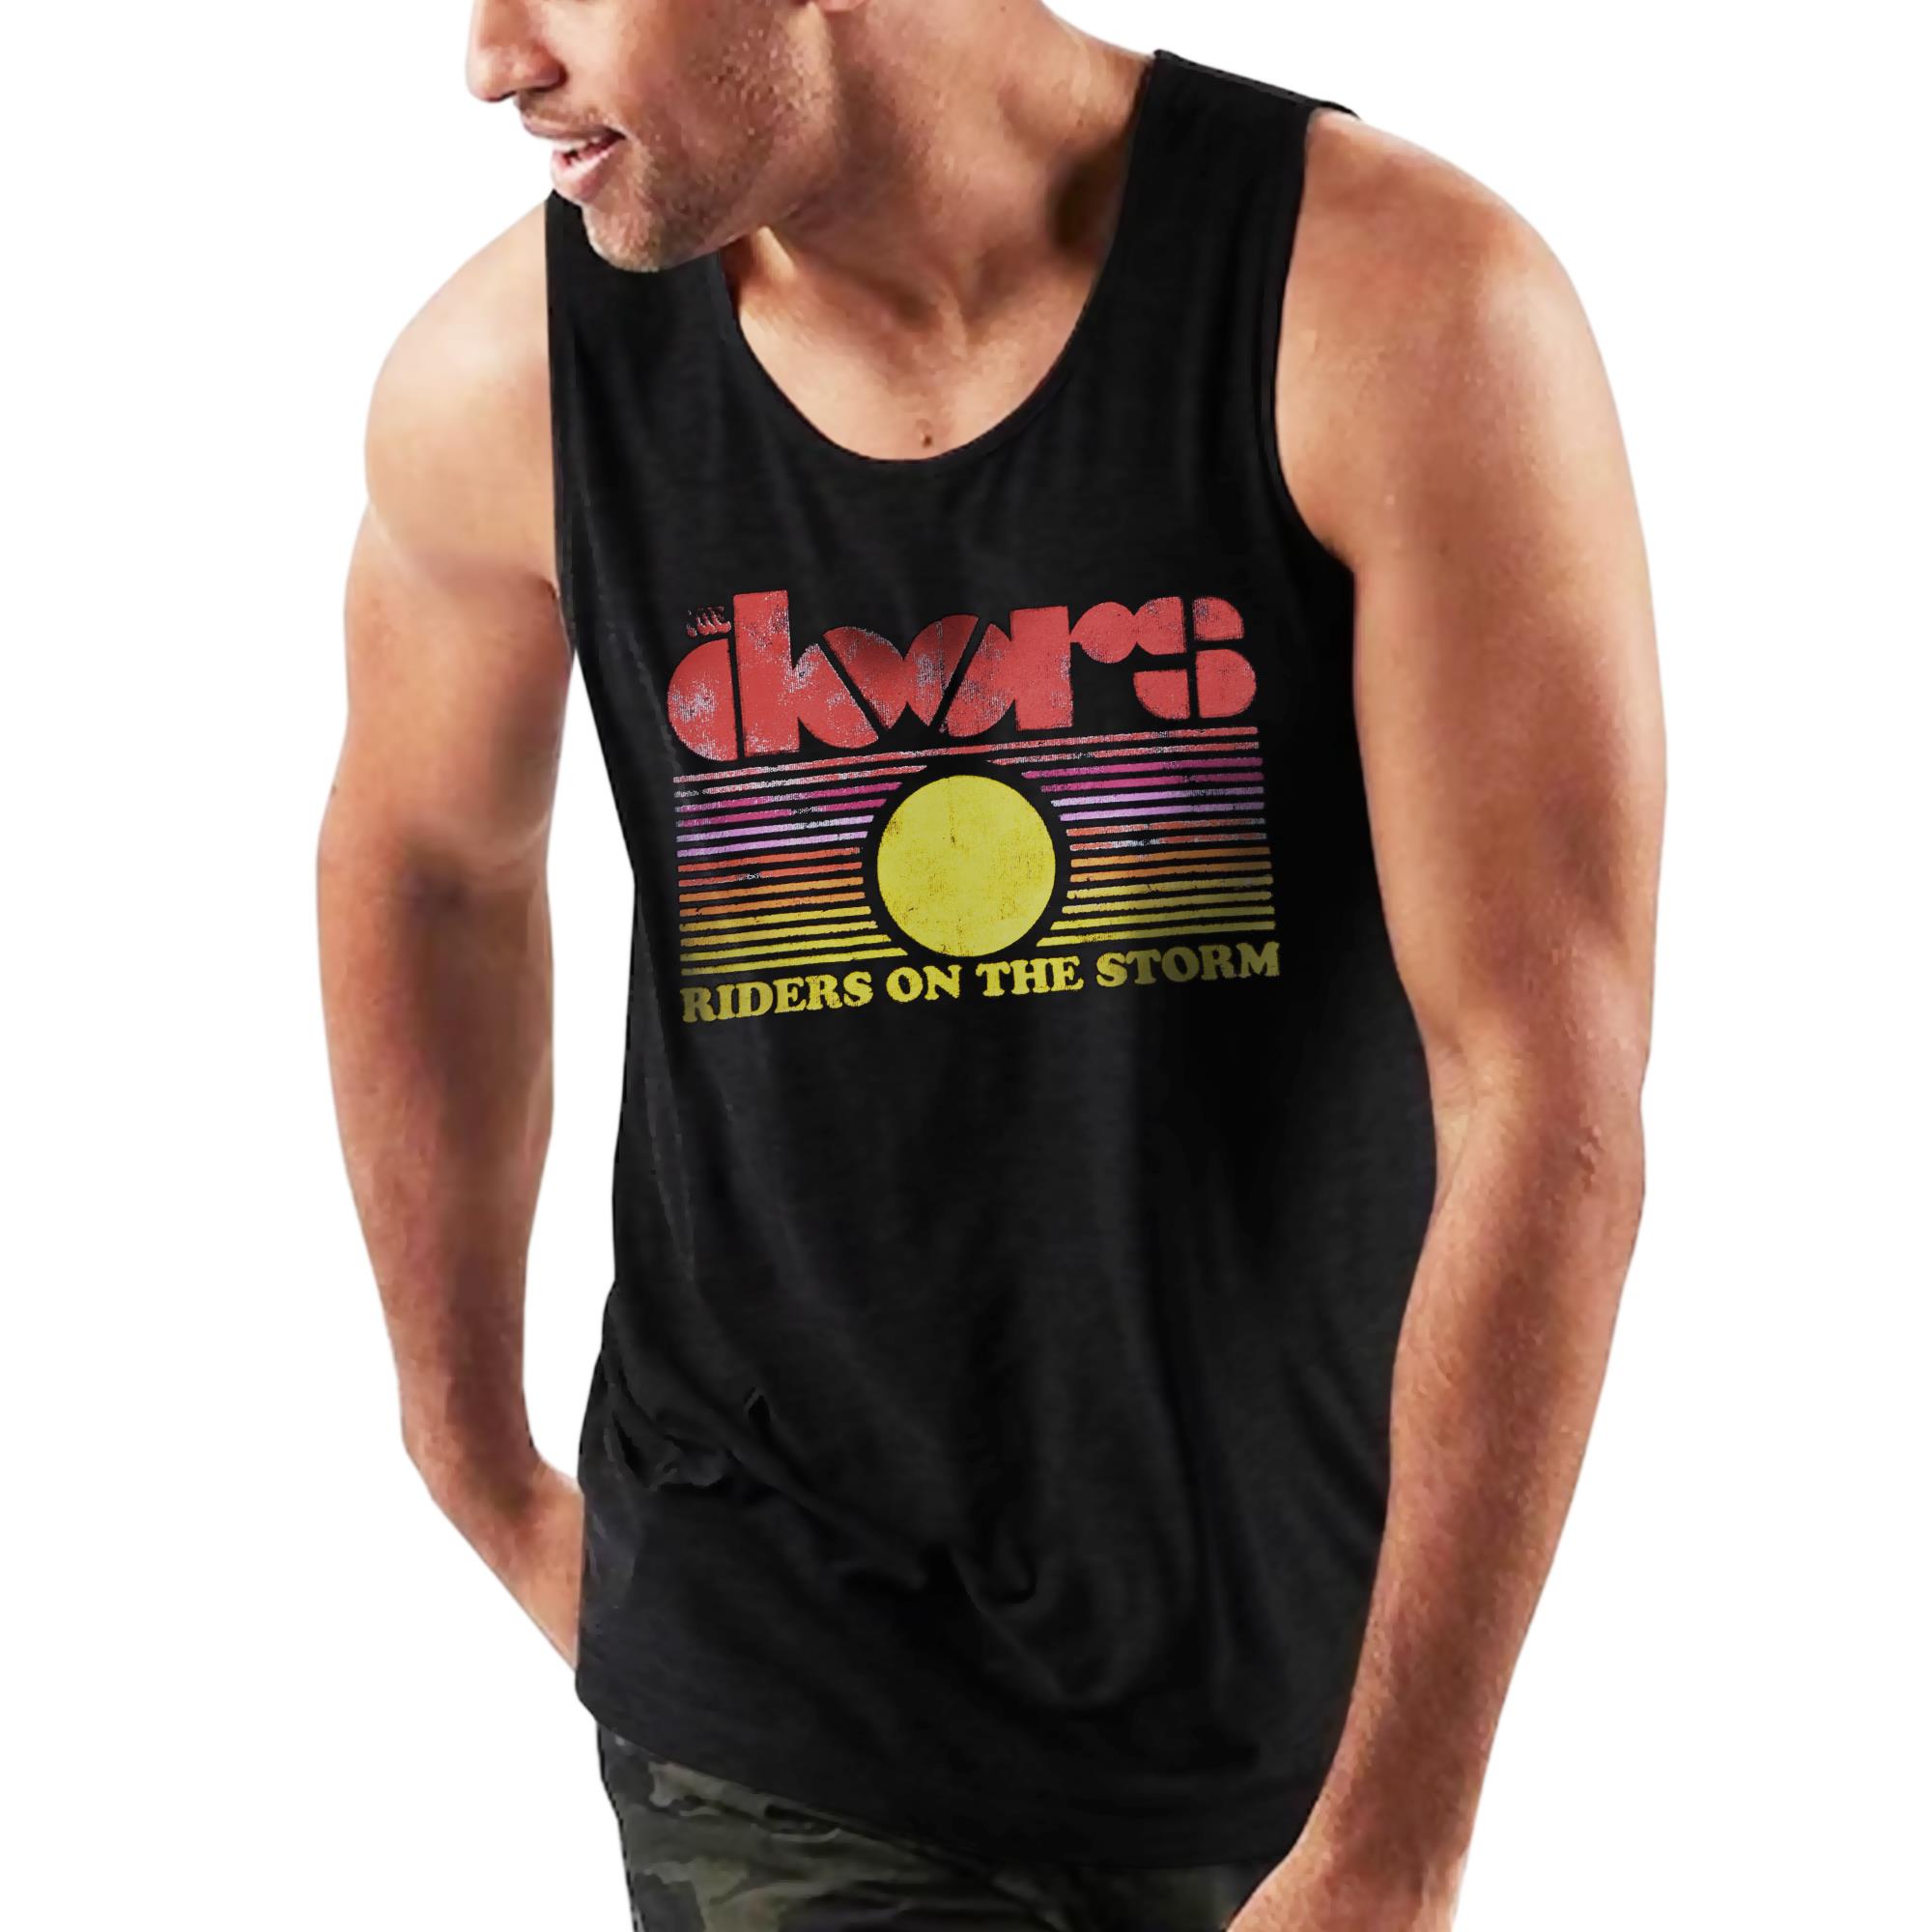 Riders on the Storm Tank Top